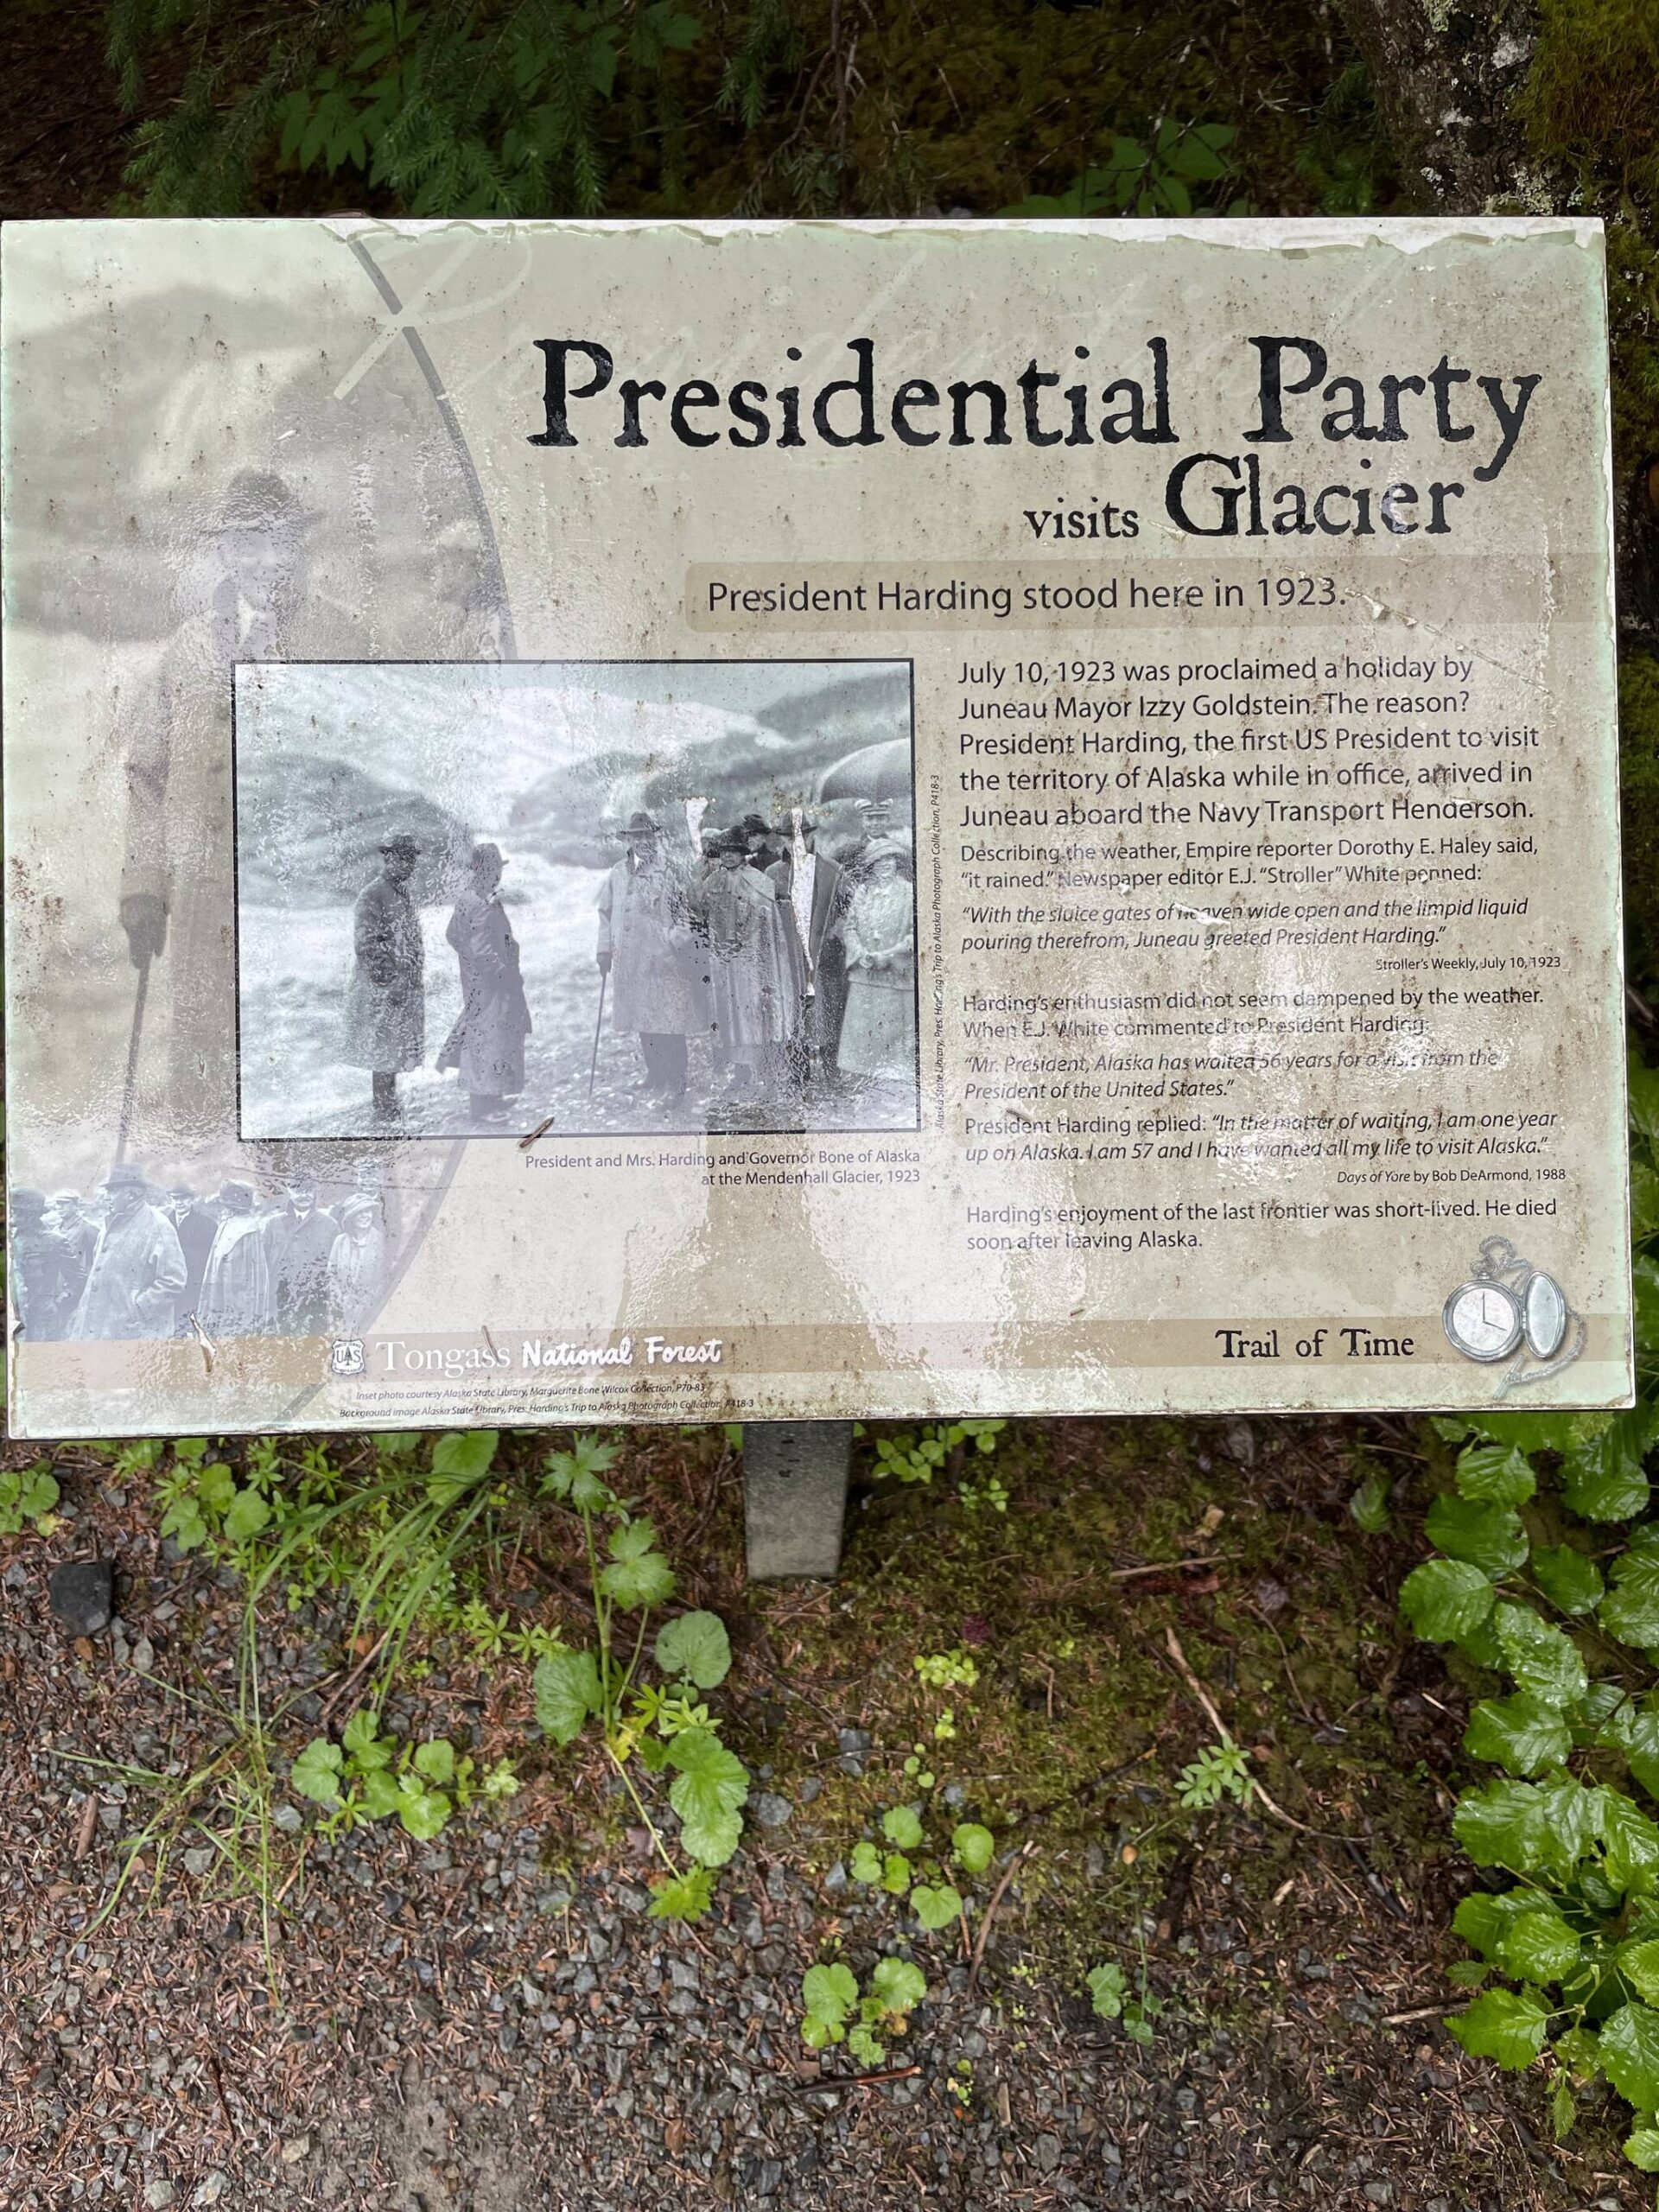 The U.S. Forest Service has erected a series of interpretive signs along the Trail of Time at Mendenhall Glacier. This sign is one of many detailing significant events measured by the glacier’s retreat. Today the terminus is more than 1.5 miles from this spot where President Warren G. Harding stood in 1923. (Photo by Laurie Craig)